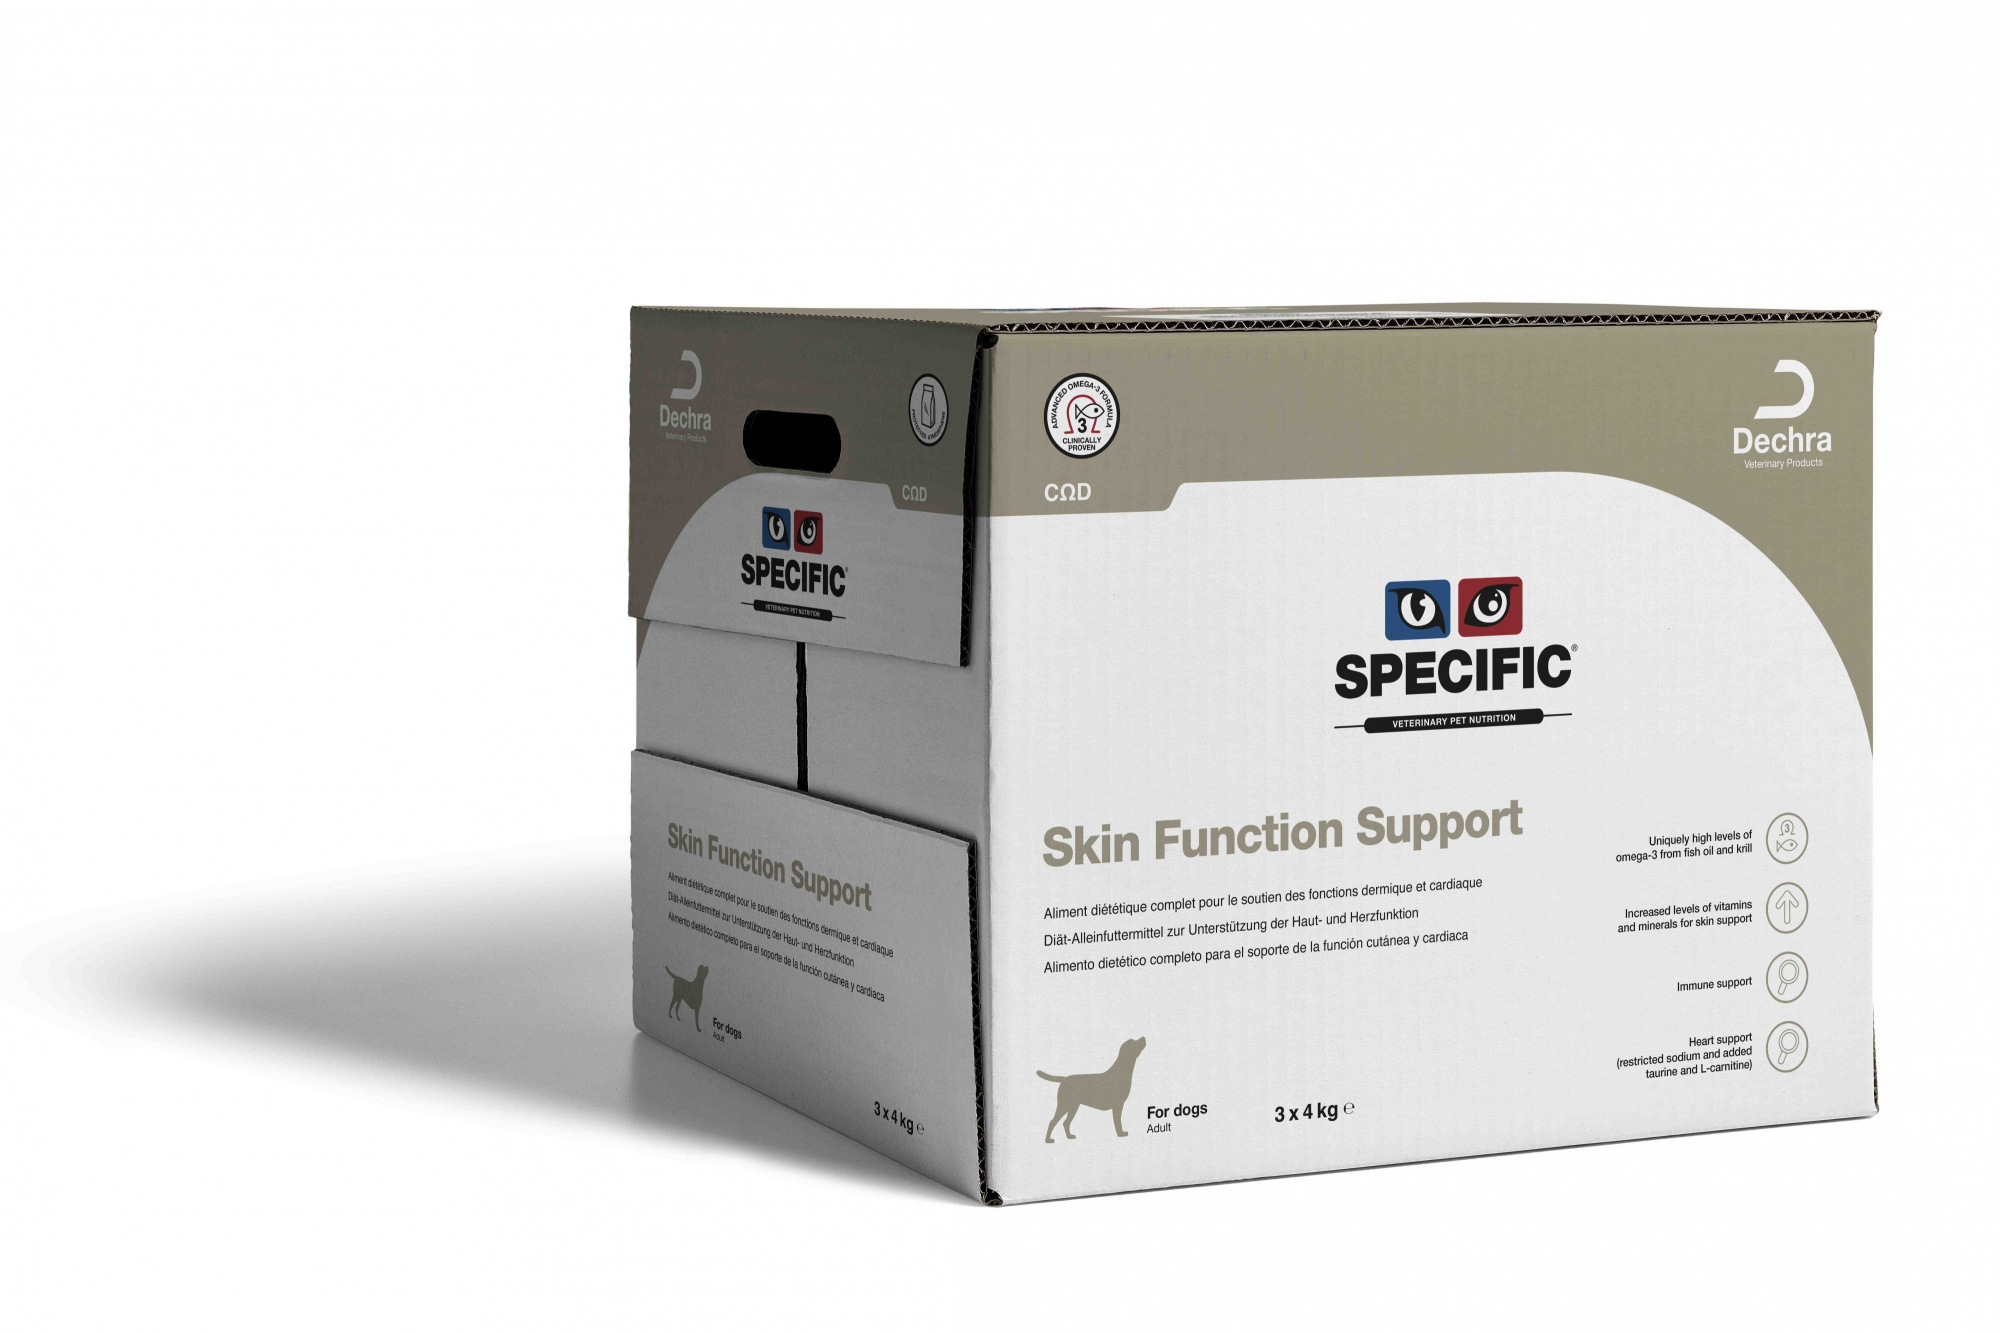 SPECIFIC COD SKIN FUNCTION Support para cão